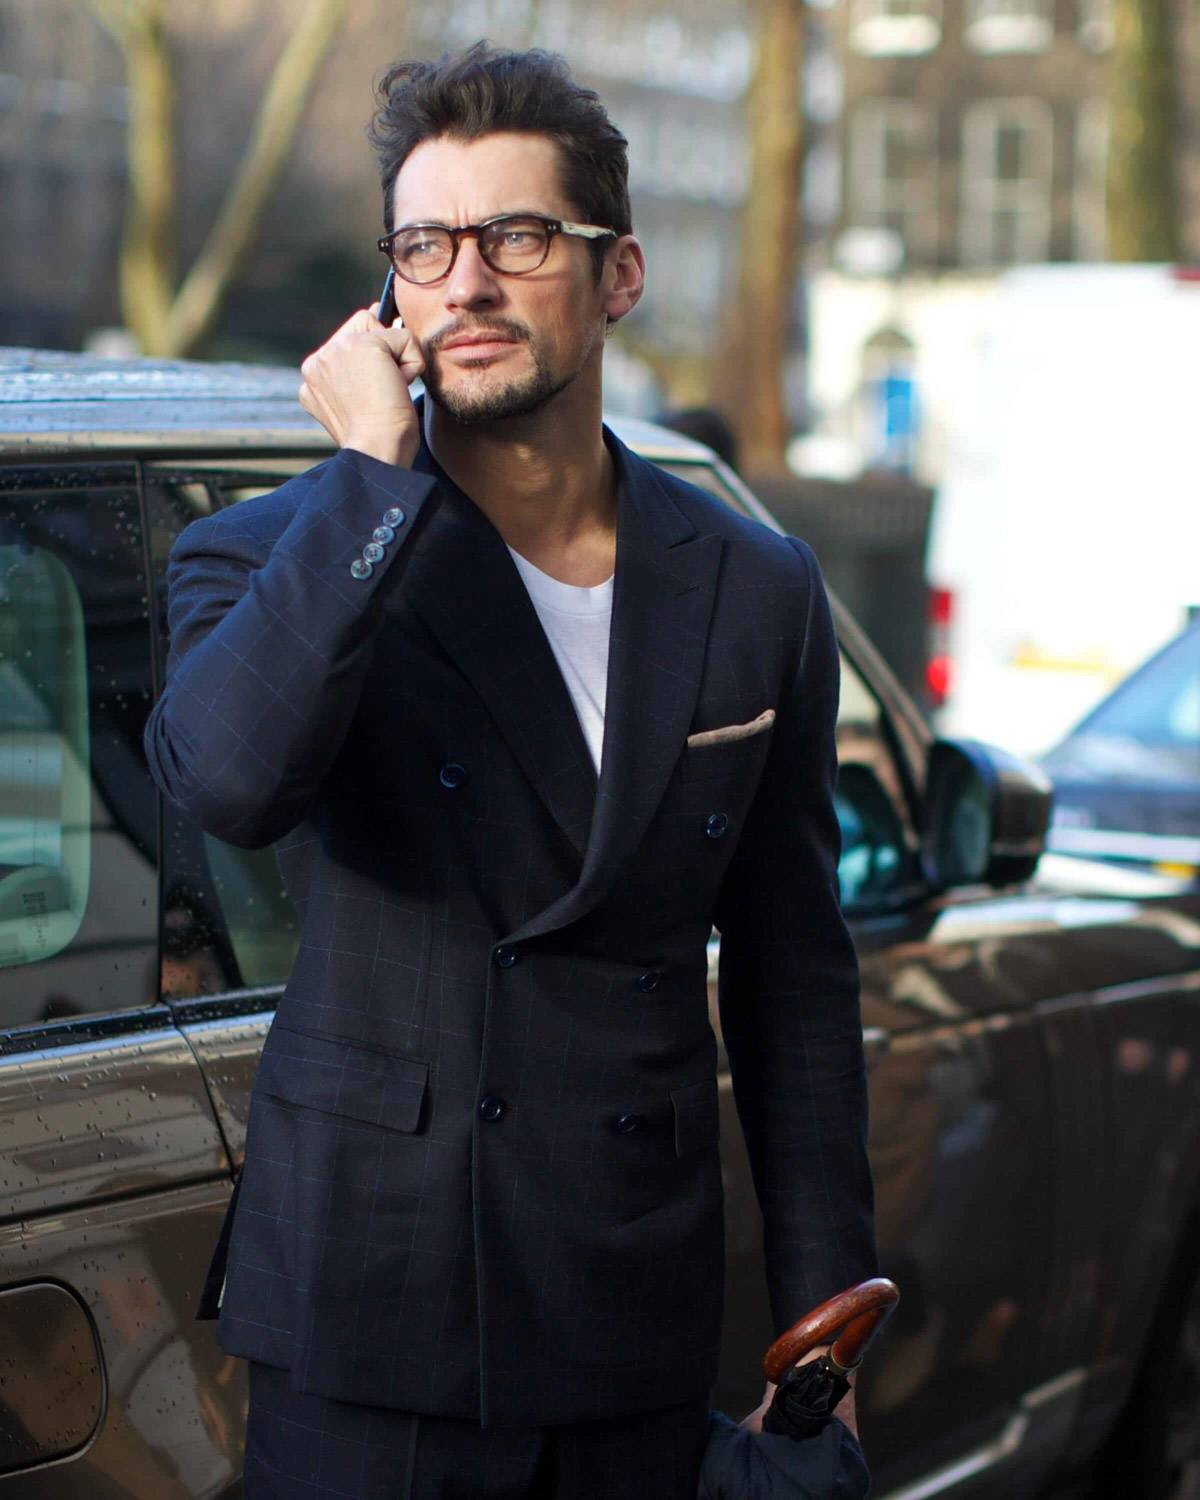 How To Get David Gandy's Style; The Best Dressed Man In London